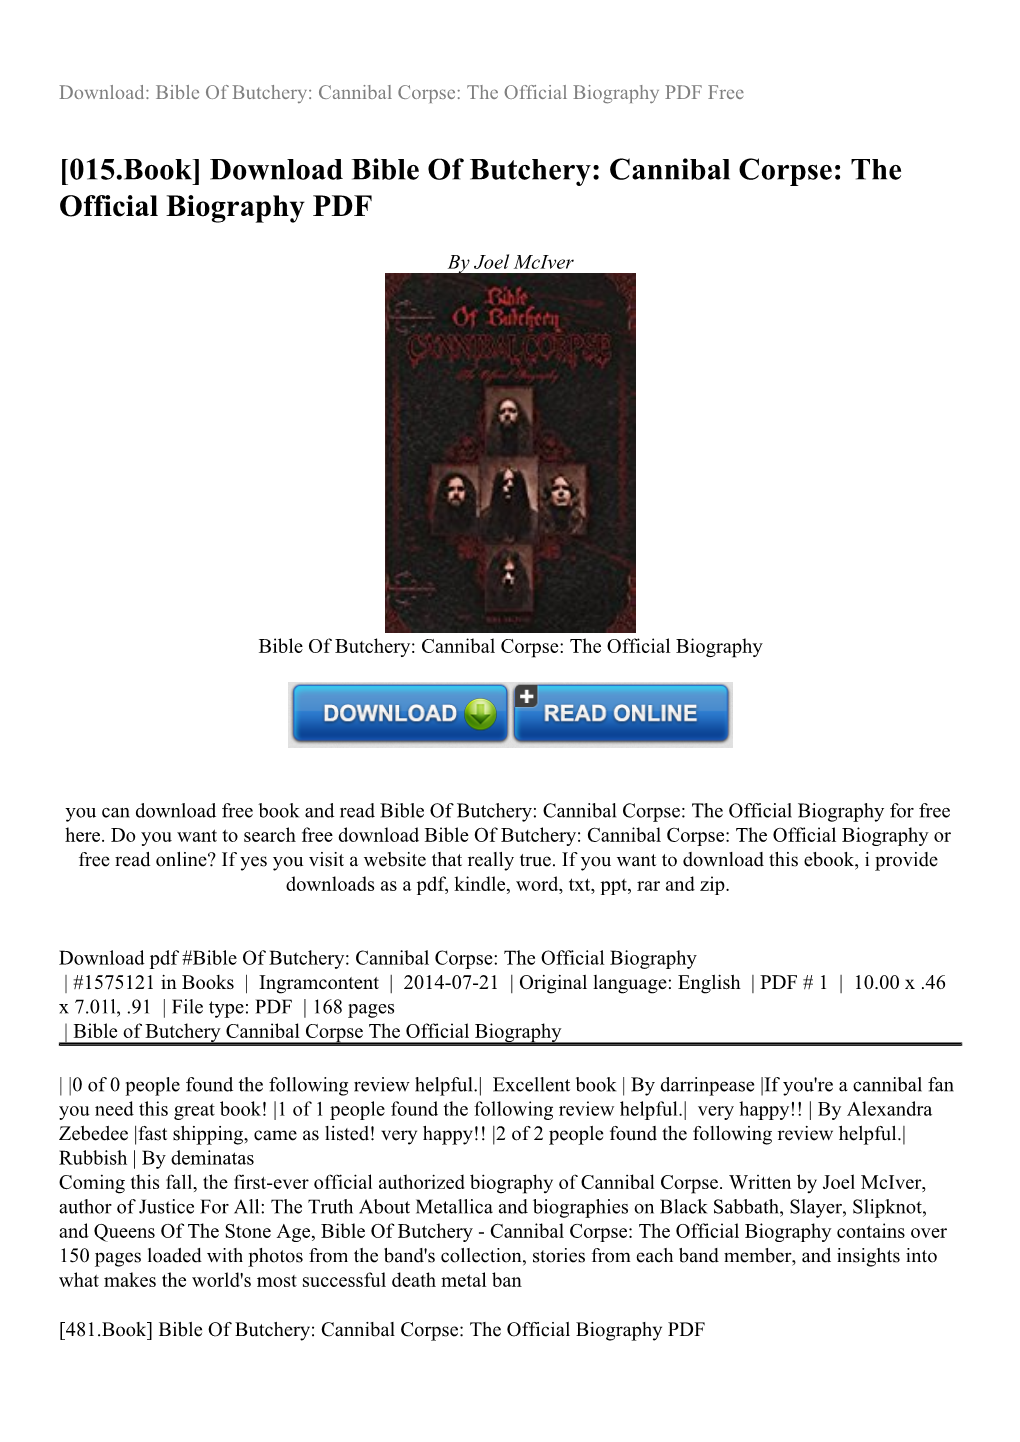 Download Bible of Butchery: Cannibal Corpse: the Official Biography PDF